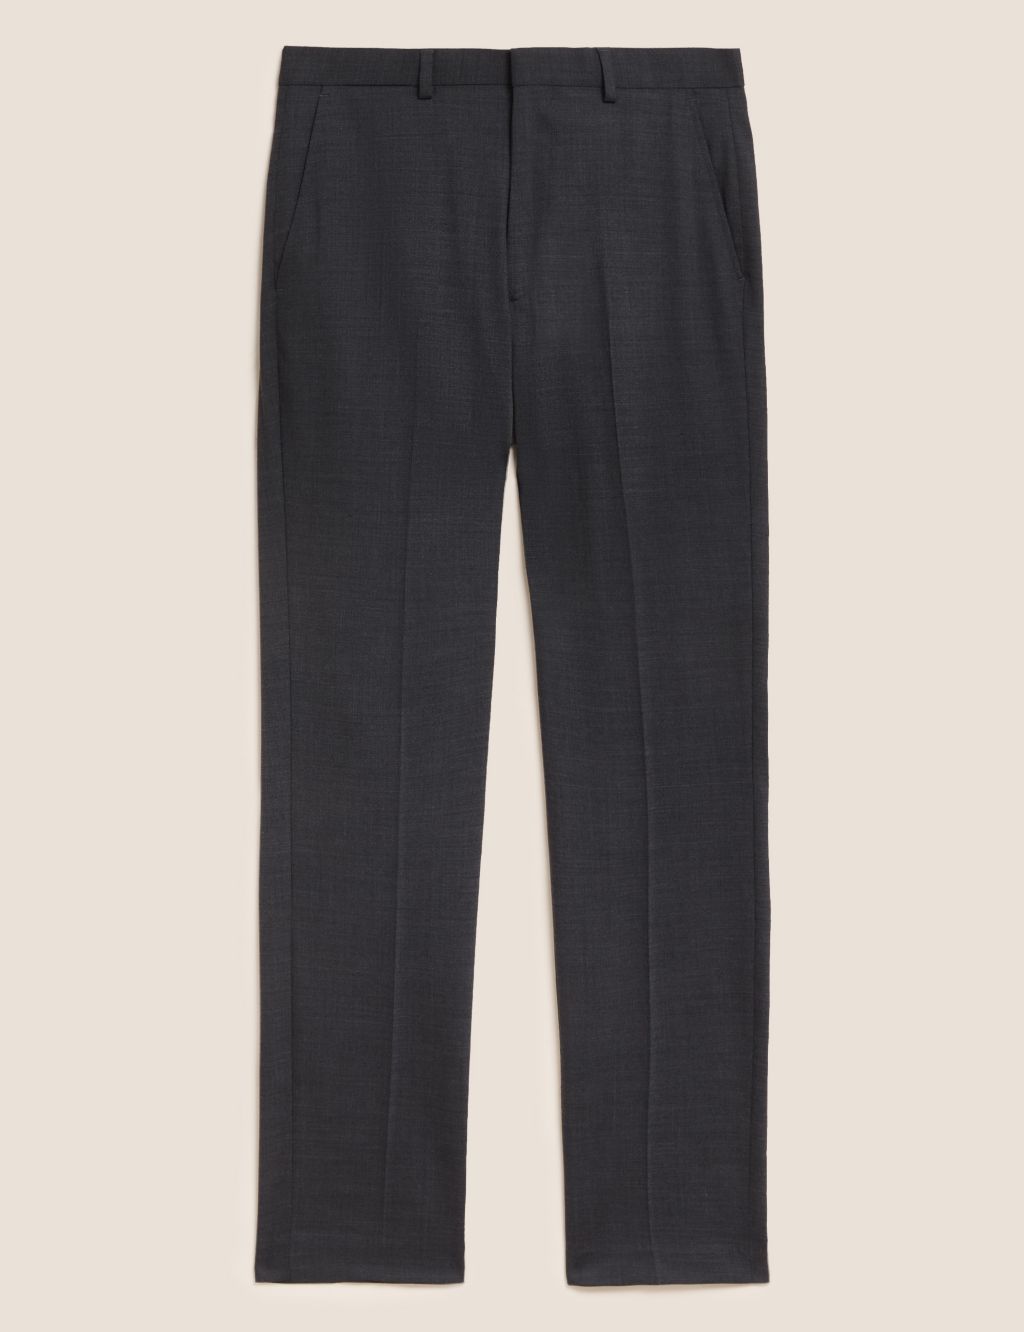 Regular Fit Wool Blend Flat Front Trousers image 6